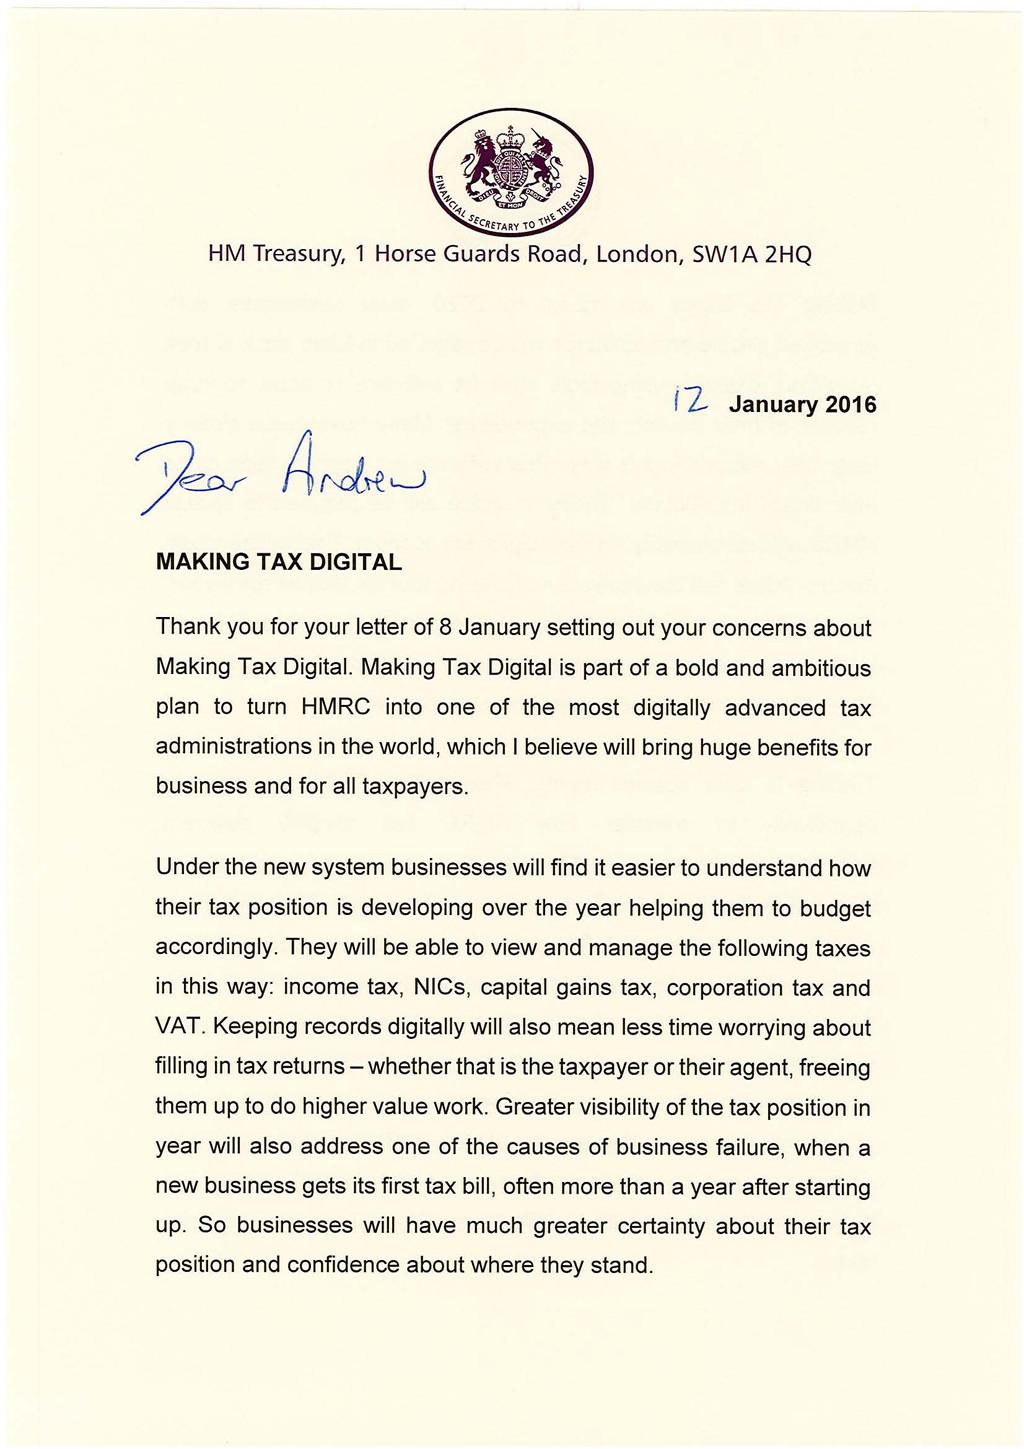 HM Treasury, 1 Horse Guards Road, London, SW1 A 2HQ f 2 January 2016 MAKING TAX DIGITAL Thank you for your letter of 8 January setting out your concerns about Making Tax Digital.